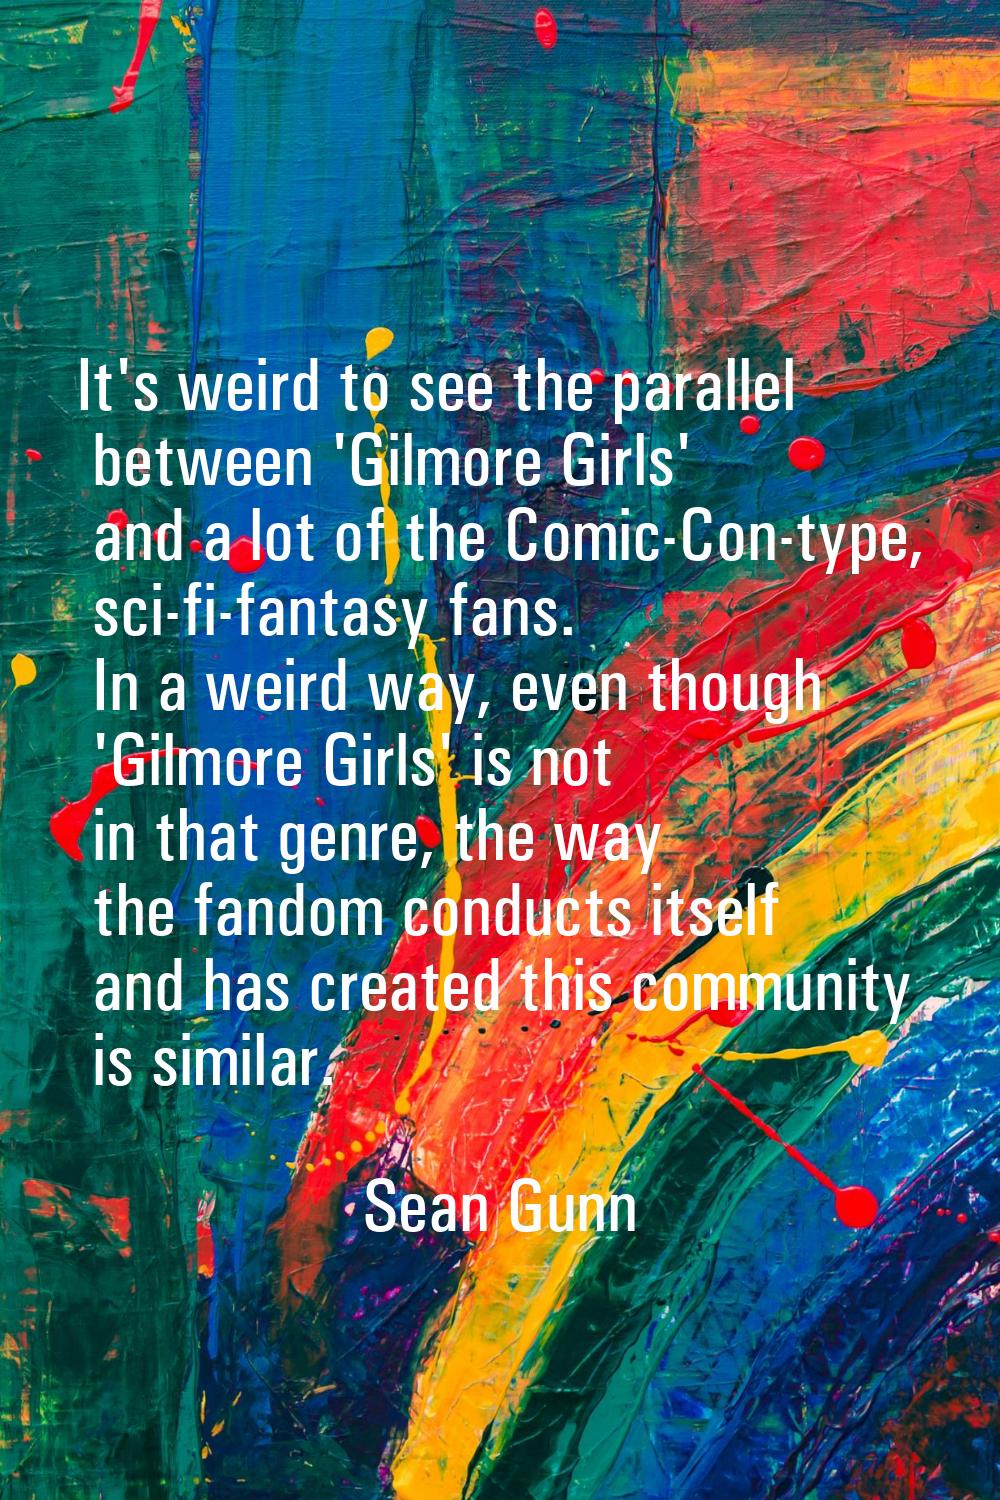 It's weird to see the parallel between 'Gilmore Girls' and a lot of the Comic-Con-type, sci-fi-fant